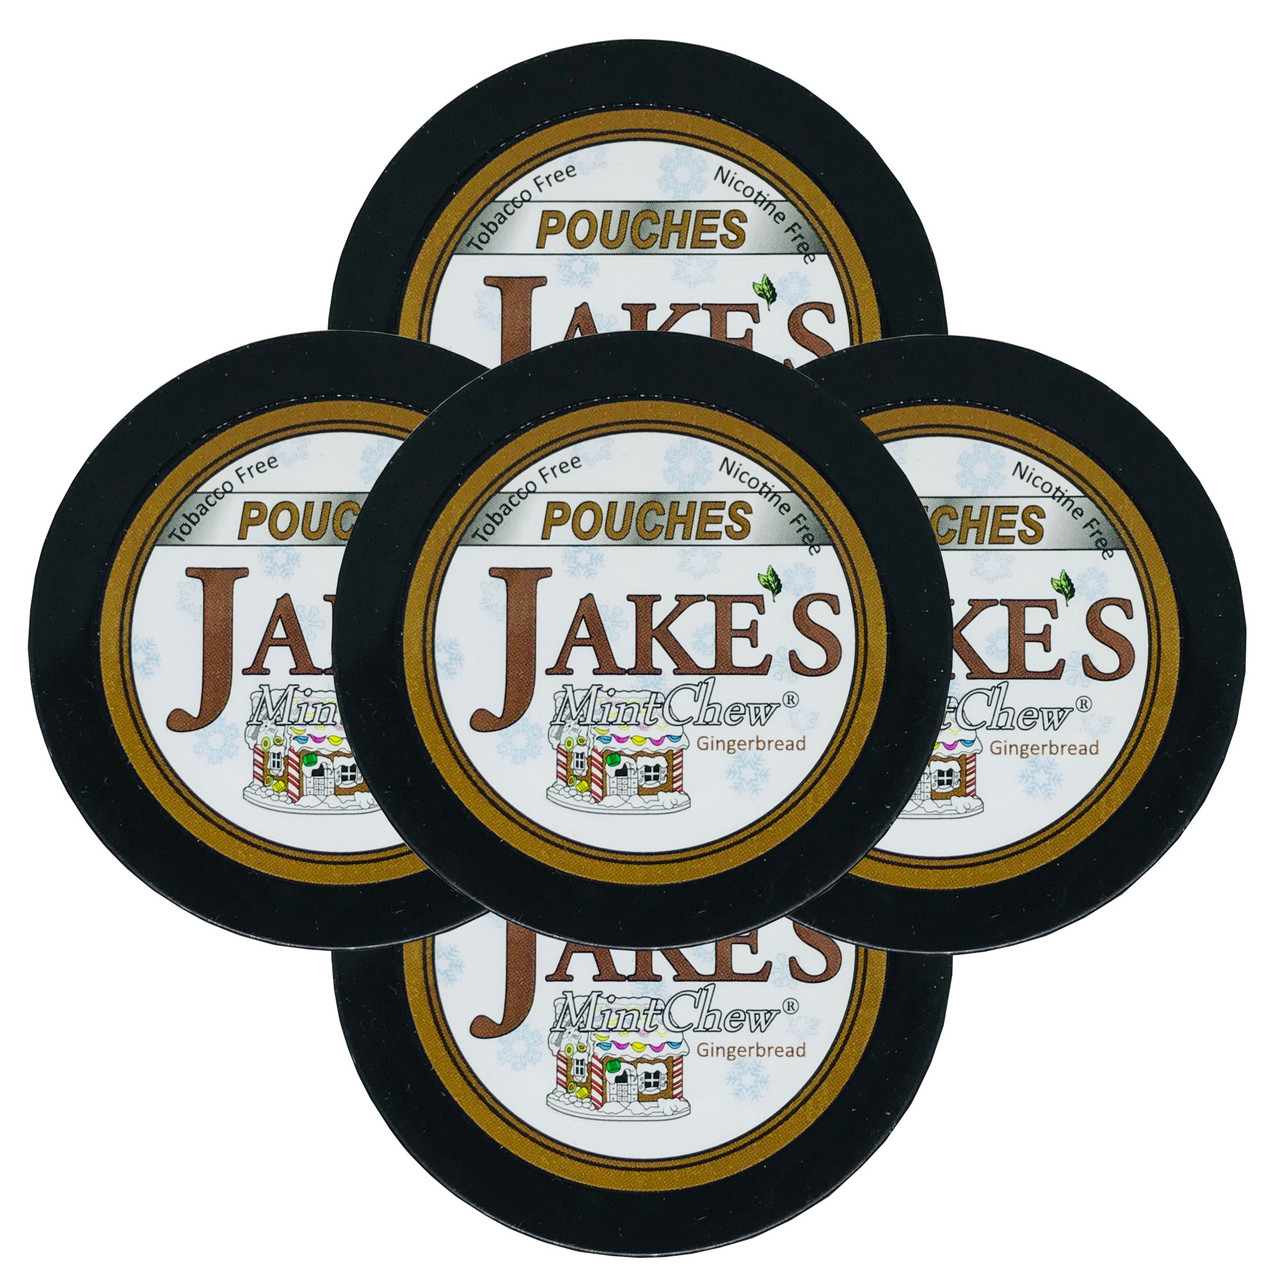 Jake's Mint Chew Pouches Gingerbread 5 Cans